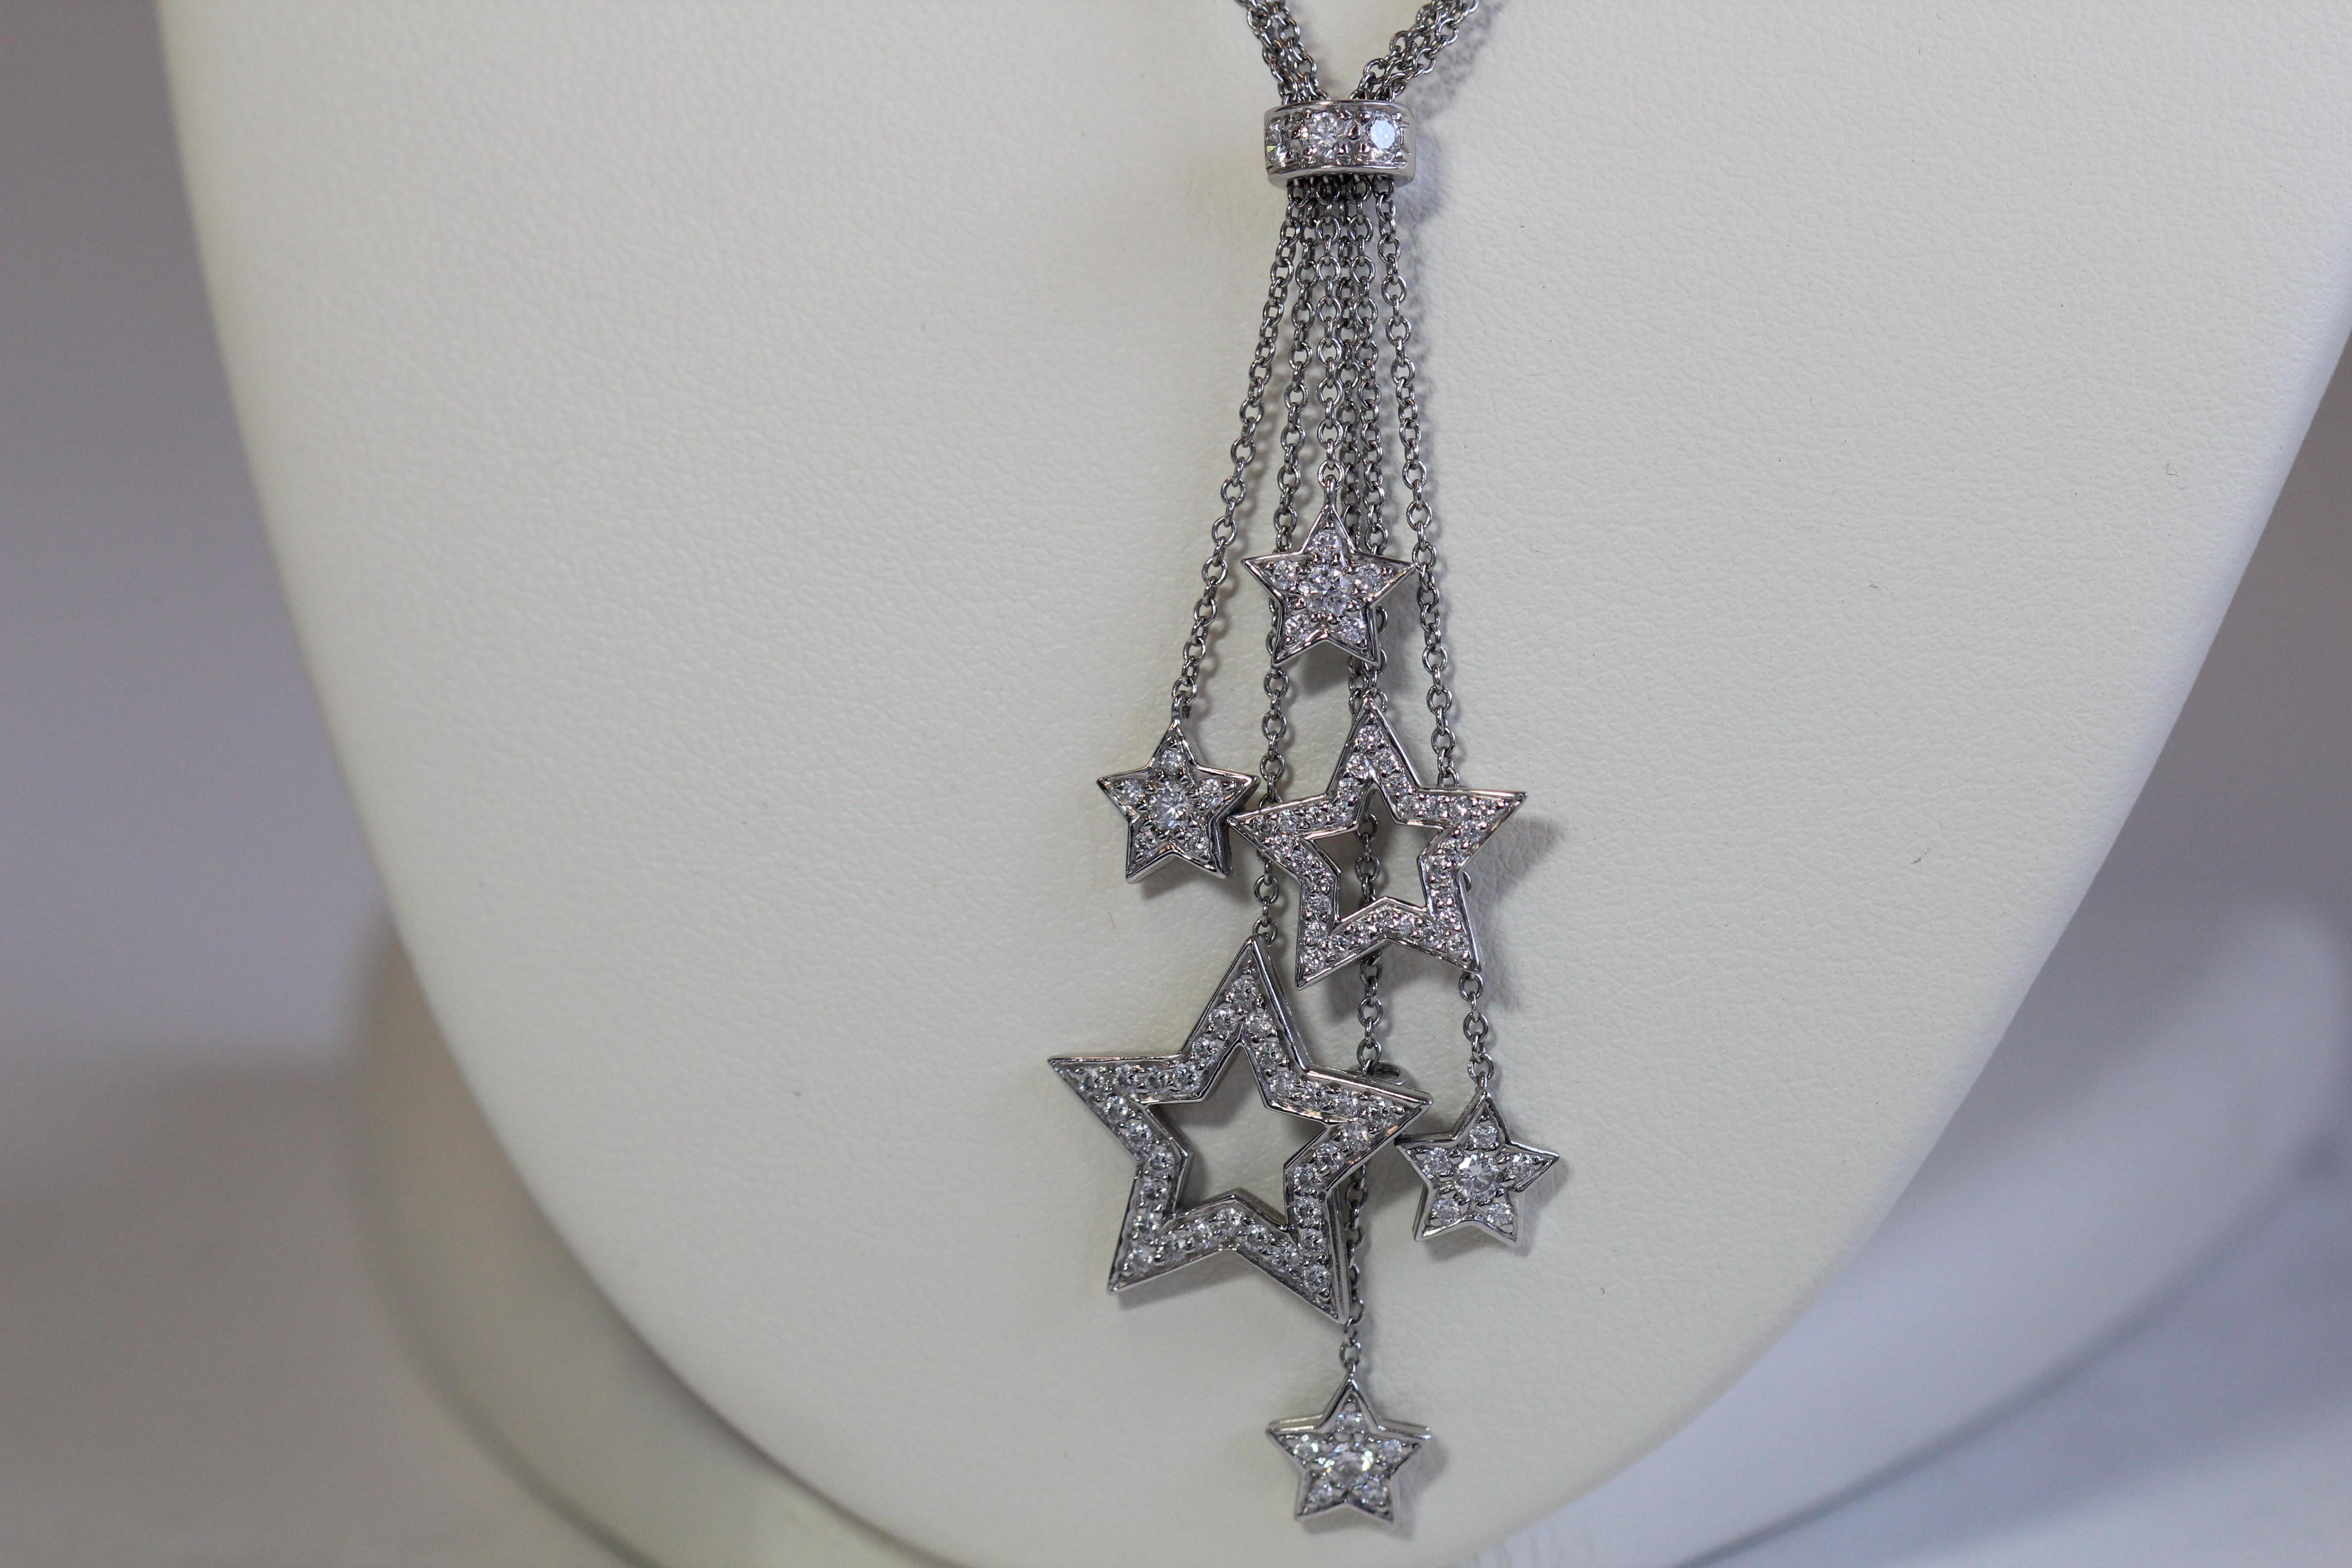 TIFFANY & CO. Platinum Ladies Star Collection DIAMOND NECKLACE

This Necklace is in overall unworn condition. Purchased in 2009

16.0 Inches in length

Dimensions of Star Part - Aprx. 2.25 Inches x 1.00 Inch

Guaranteed Authentic Tiffany & Co